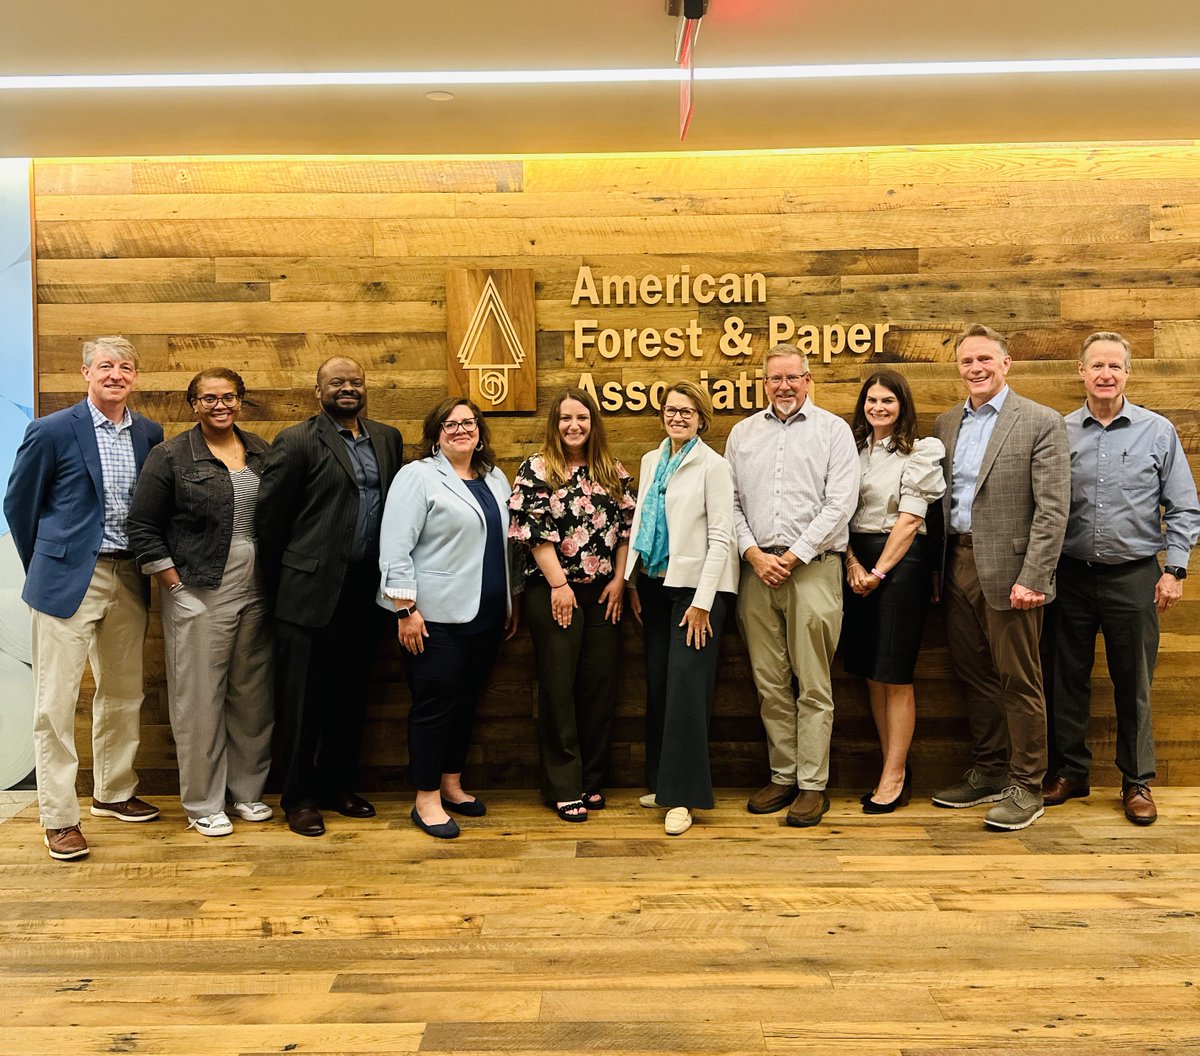 Glad to host a recent Forest Value Chain leadership meeting here at @ForestandPaper office. This group collaborates to ensure the positive story of sustainable forest, forest products and carbon benefits is shared and understood.